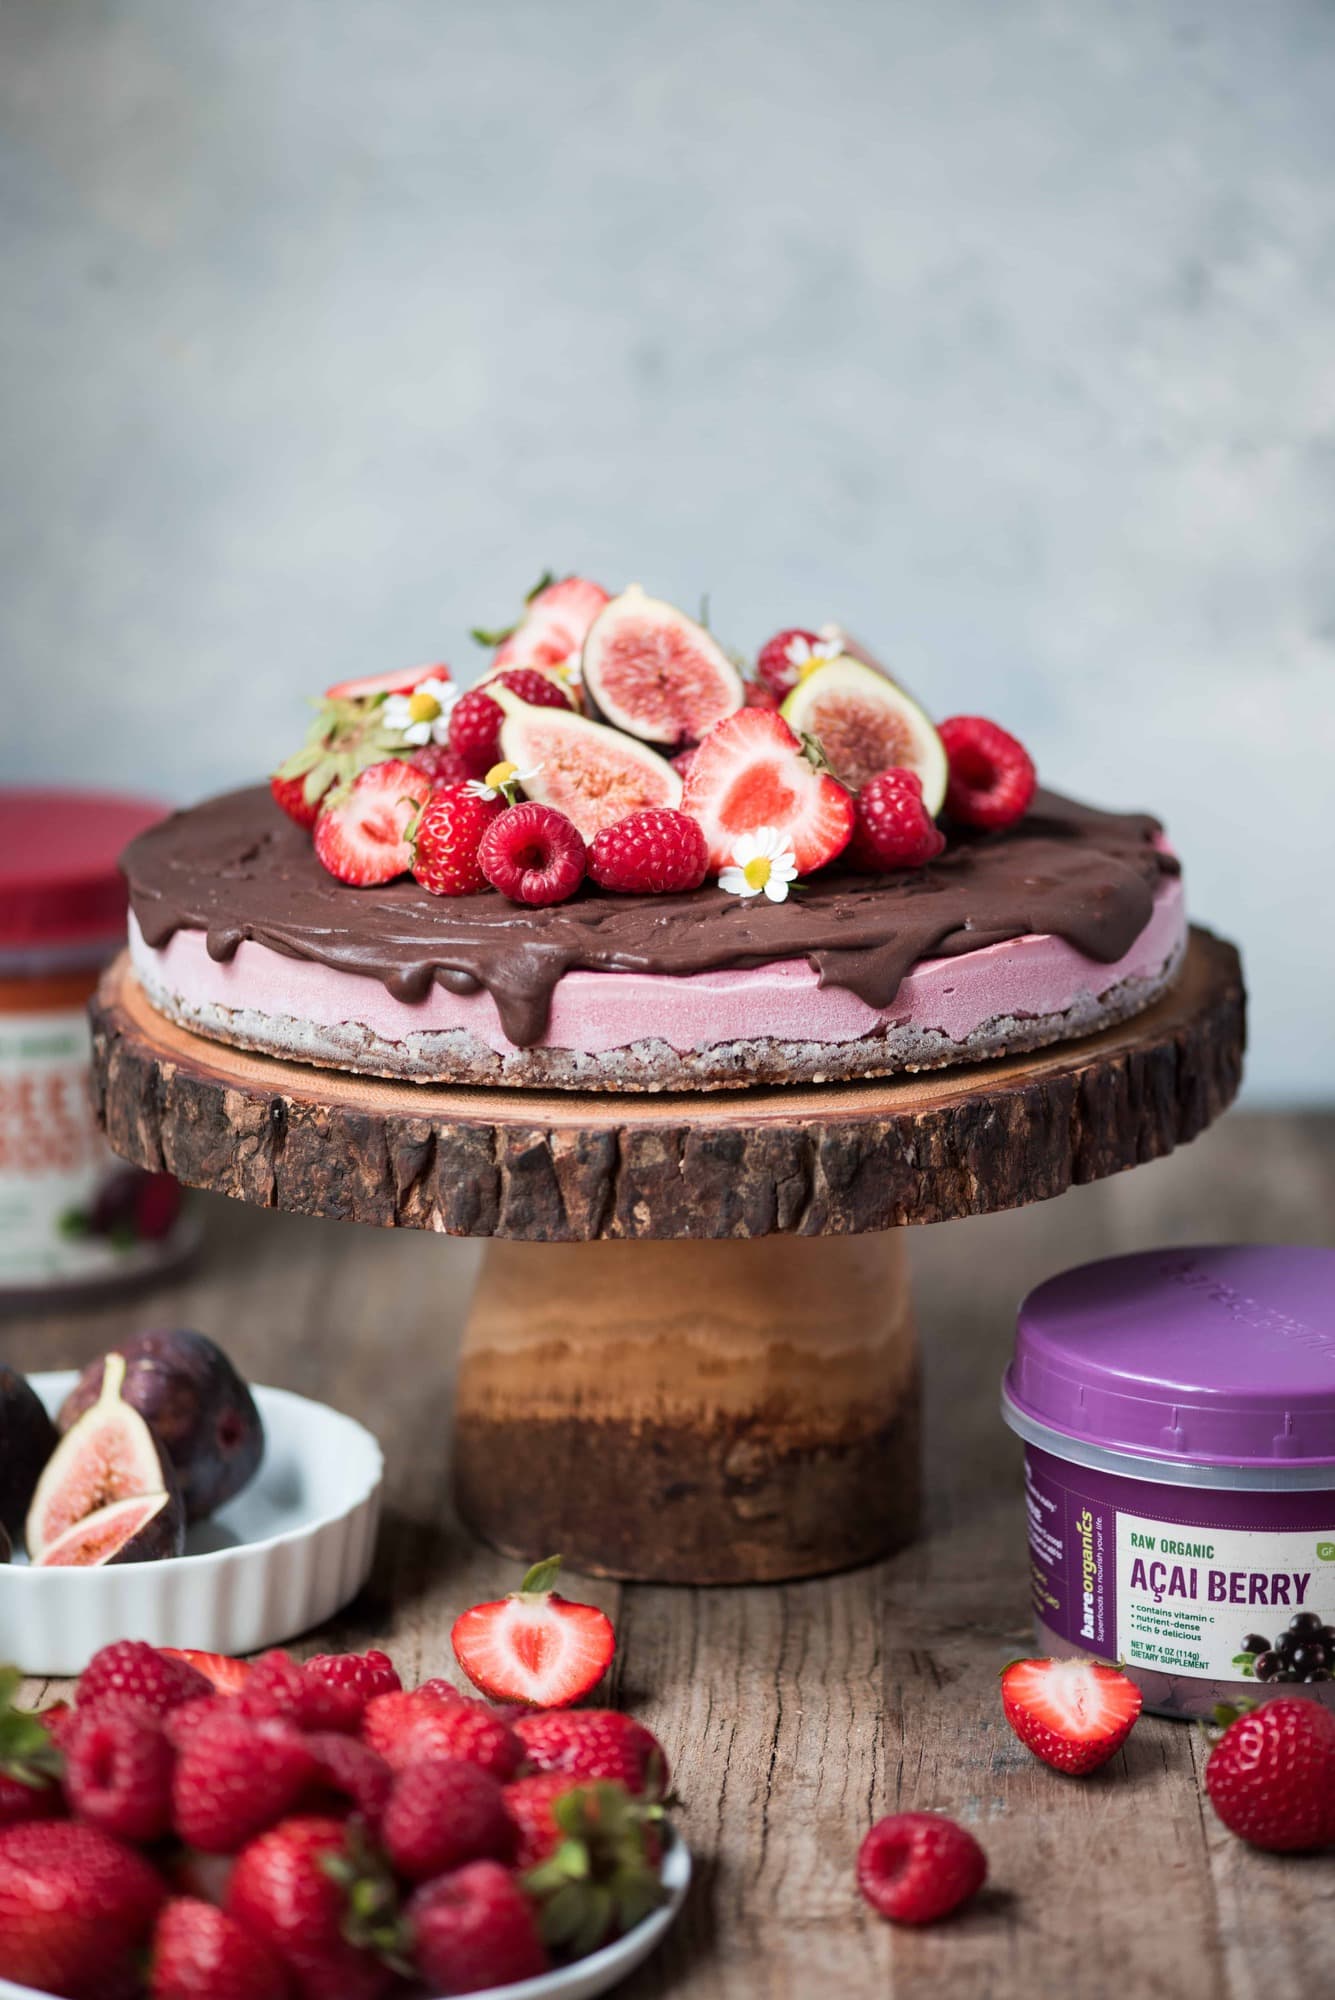 Berry vegan cheesecake with chocolate ganache and fresh fruit on a wood cake stand surrounded by bowls of fresh berries